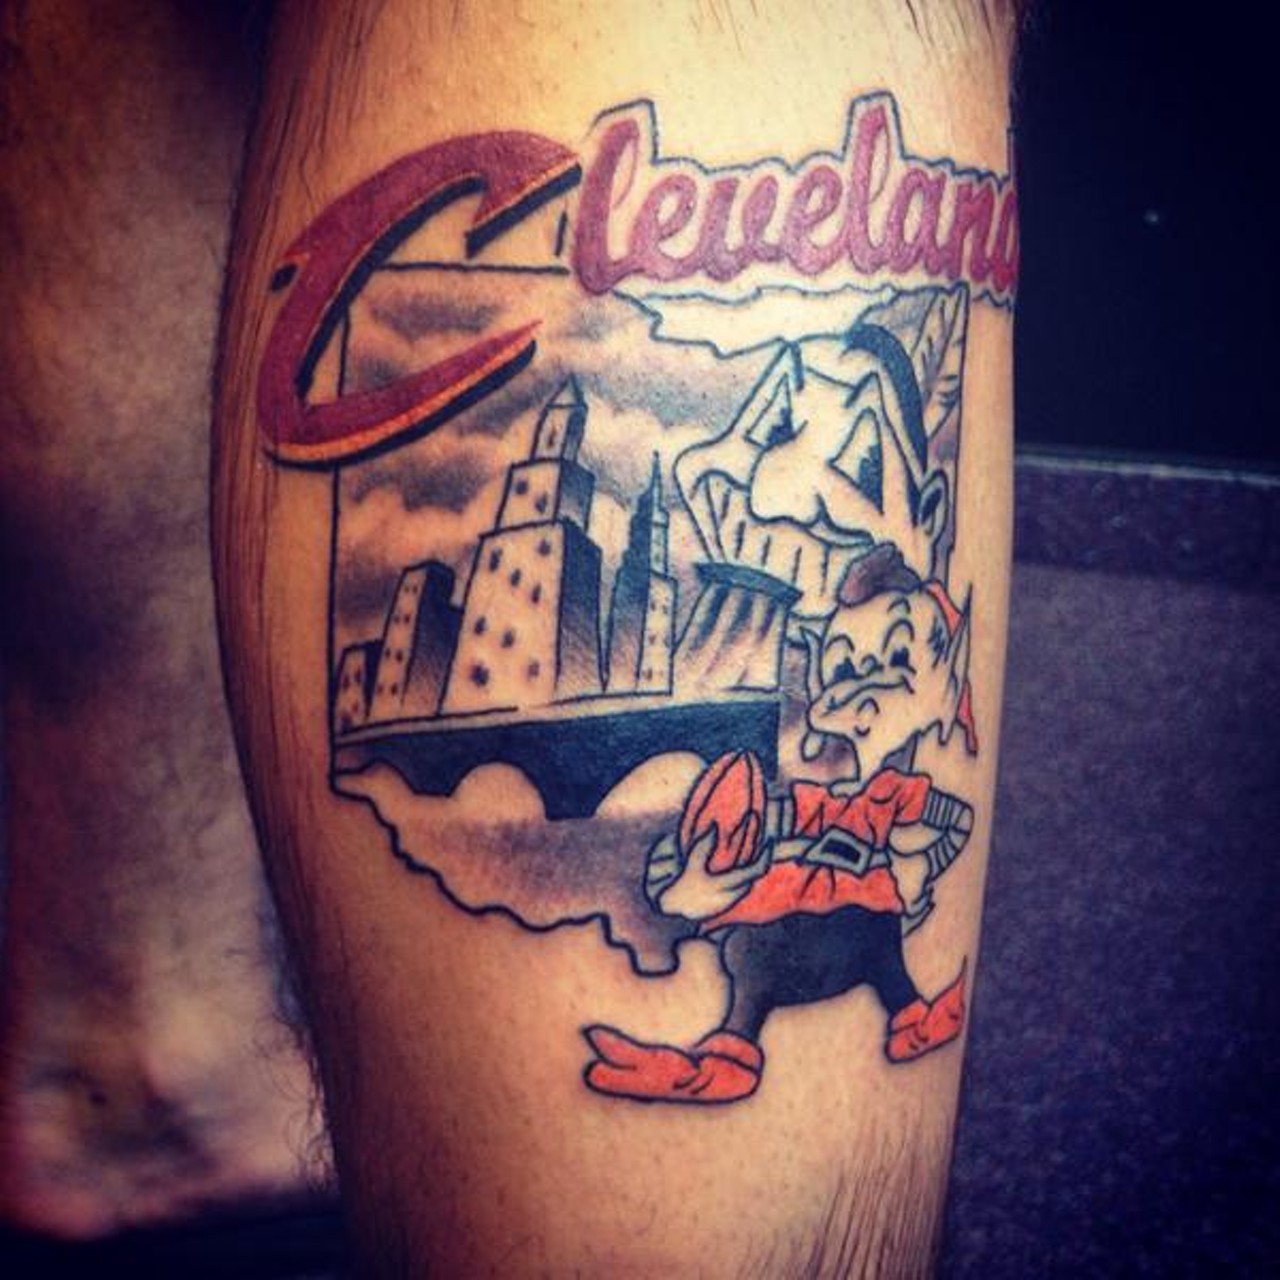 17 Awesome Tattoos from Cleveland's Biggest Fans, Cleveland